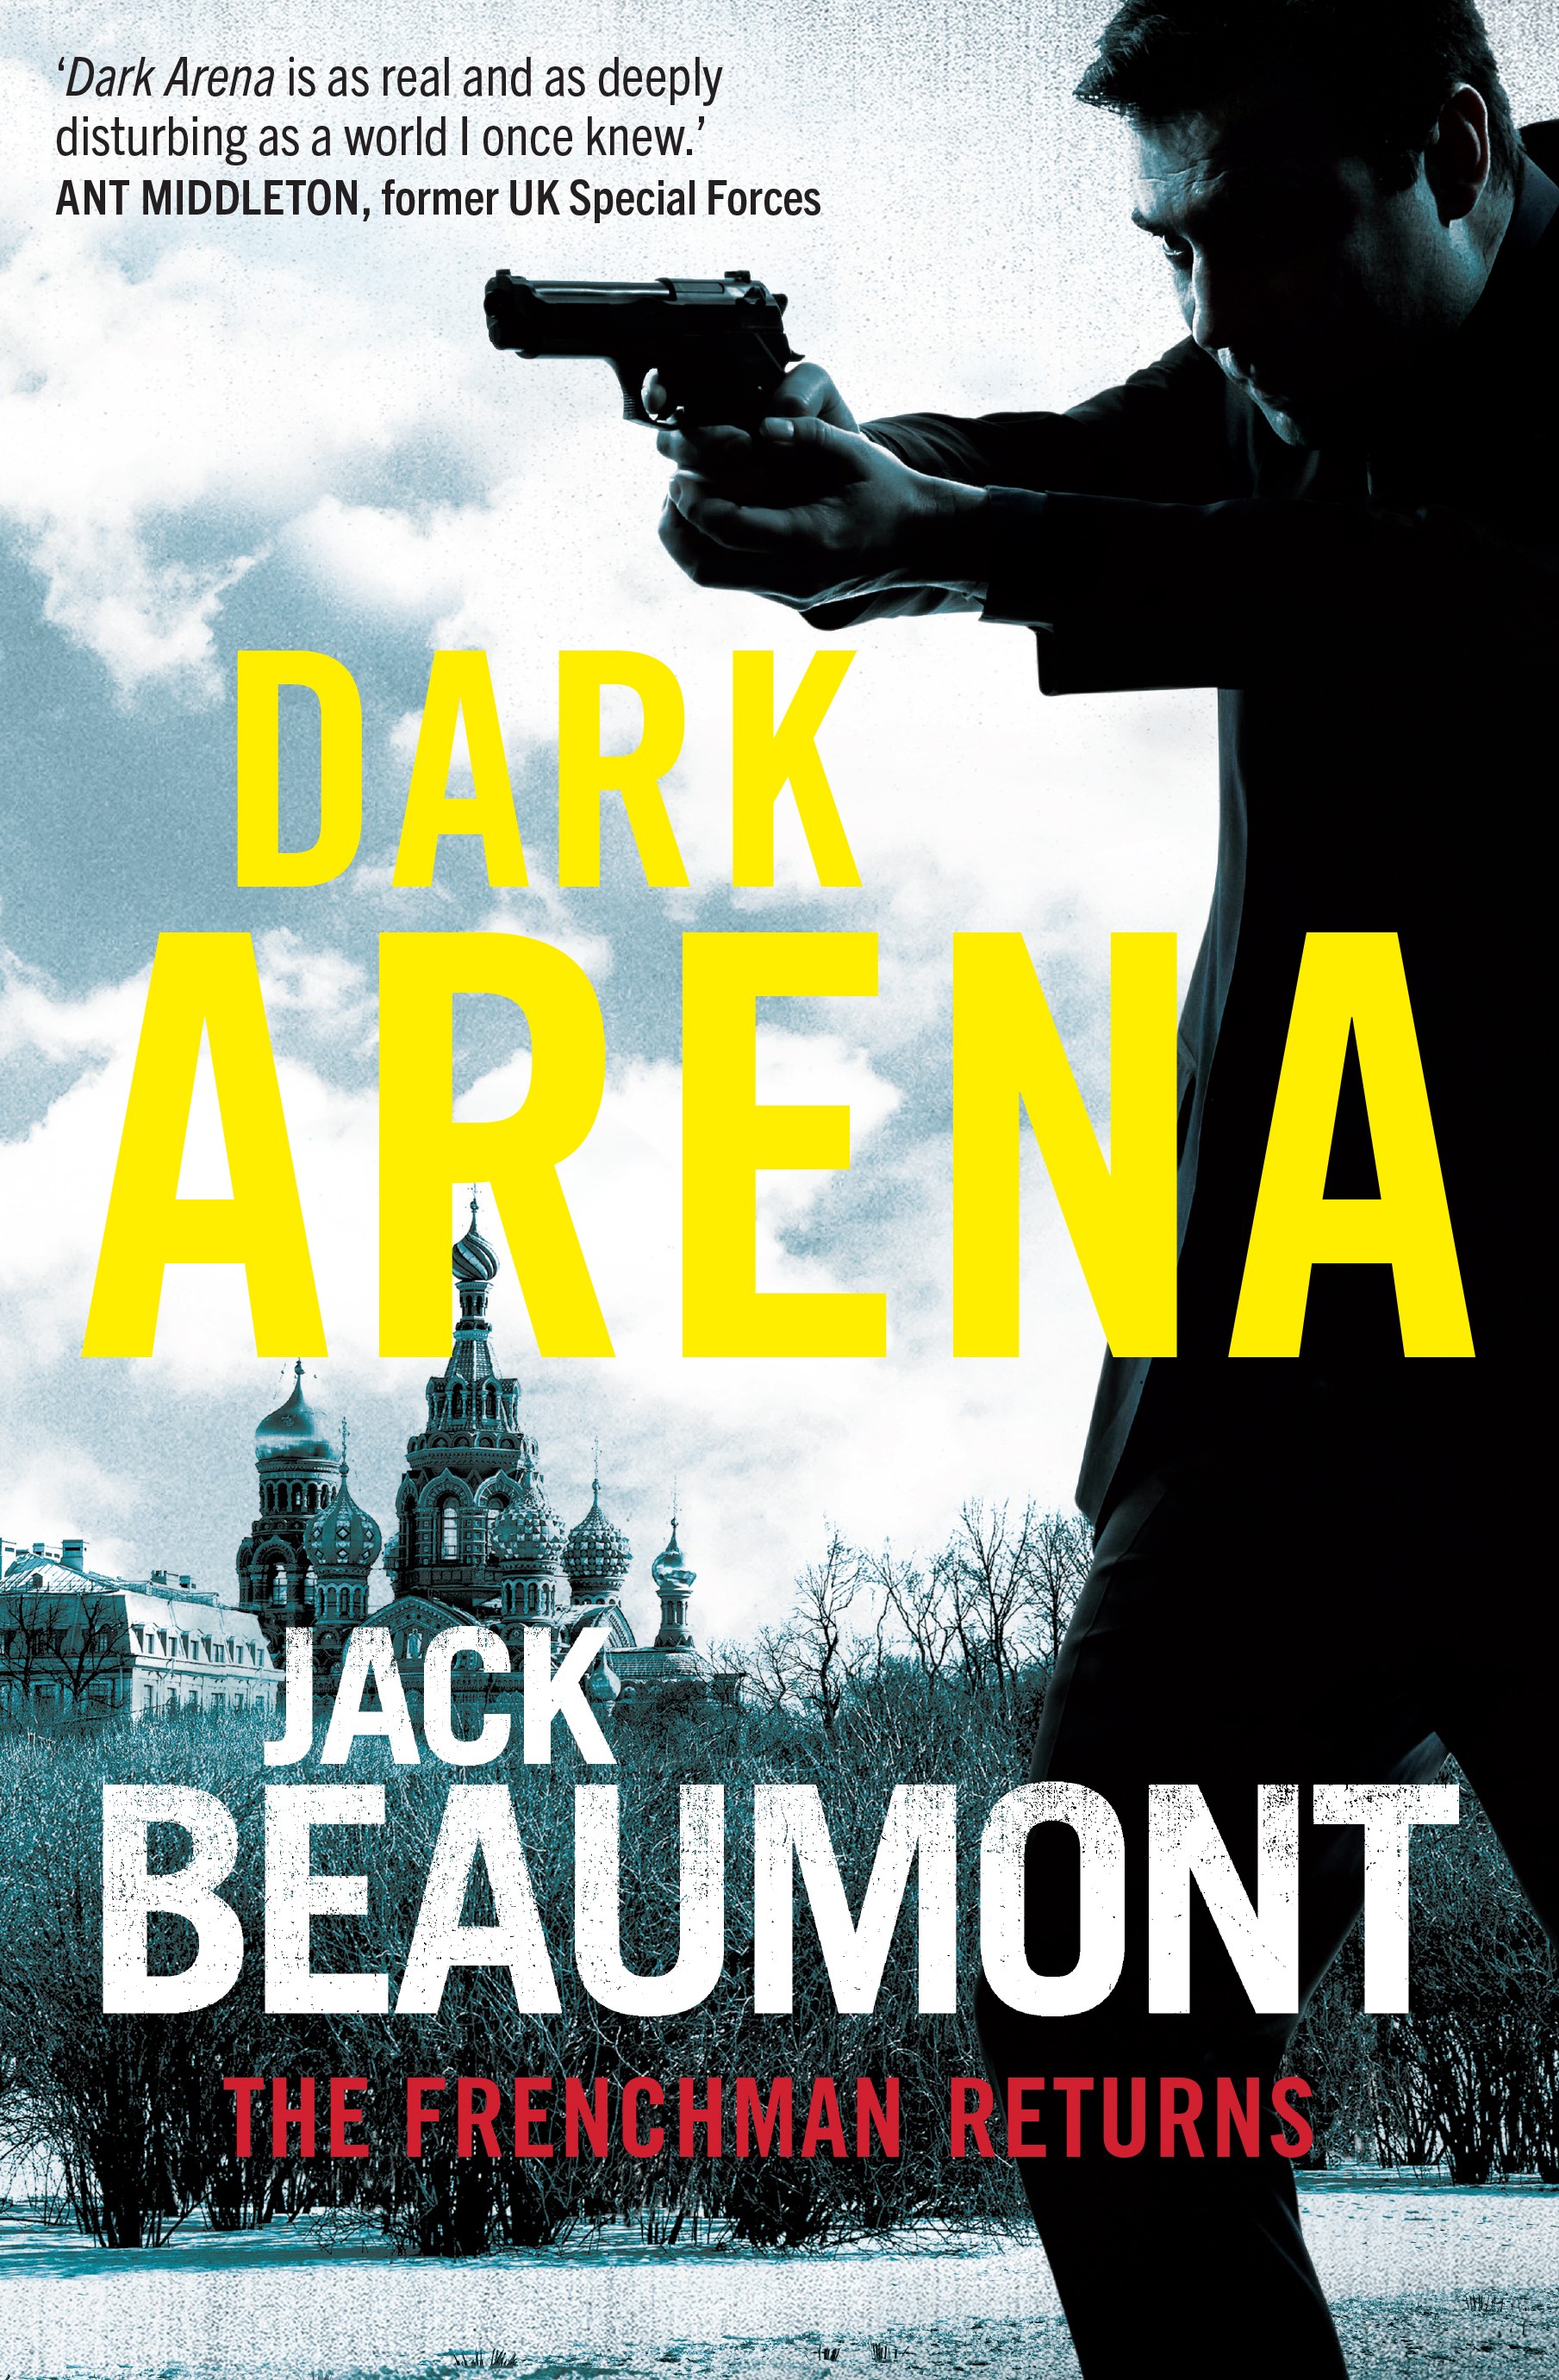 Cover for Jack Beaumont's new book 'Dark Arena'. Silhouette of a man holding a gun